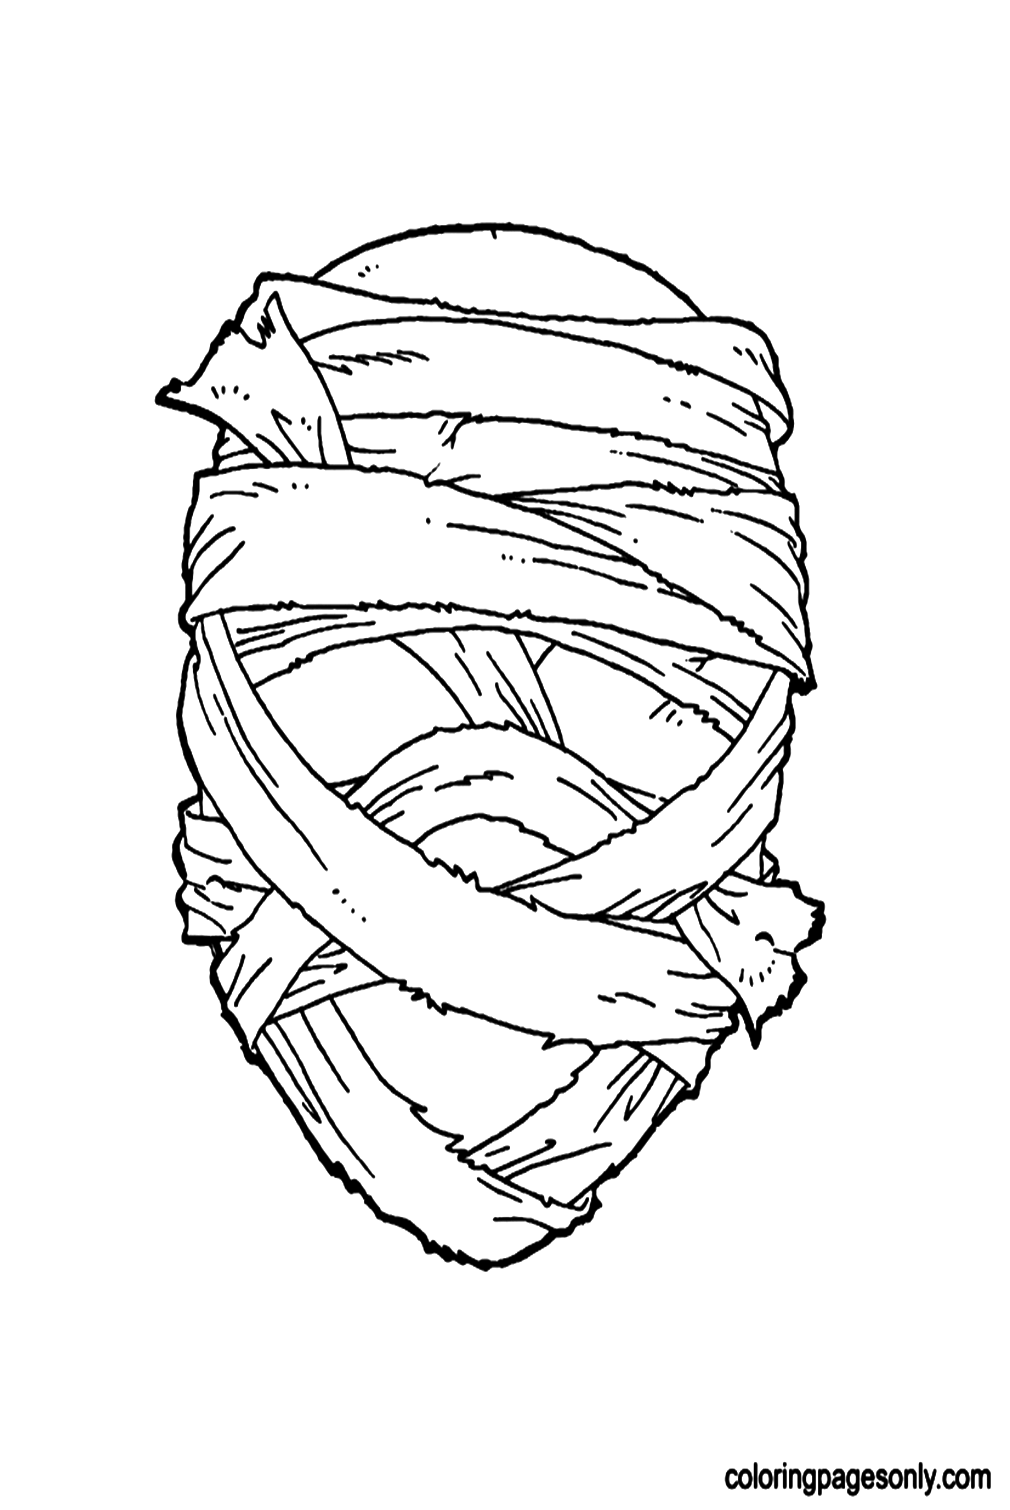 Printable Halloween Mask Free Coloring Pages